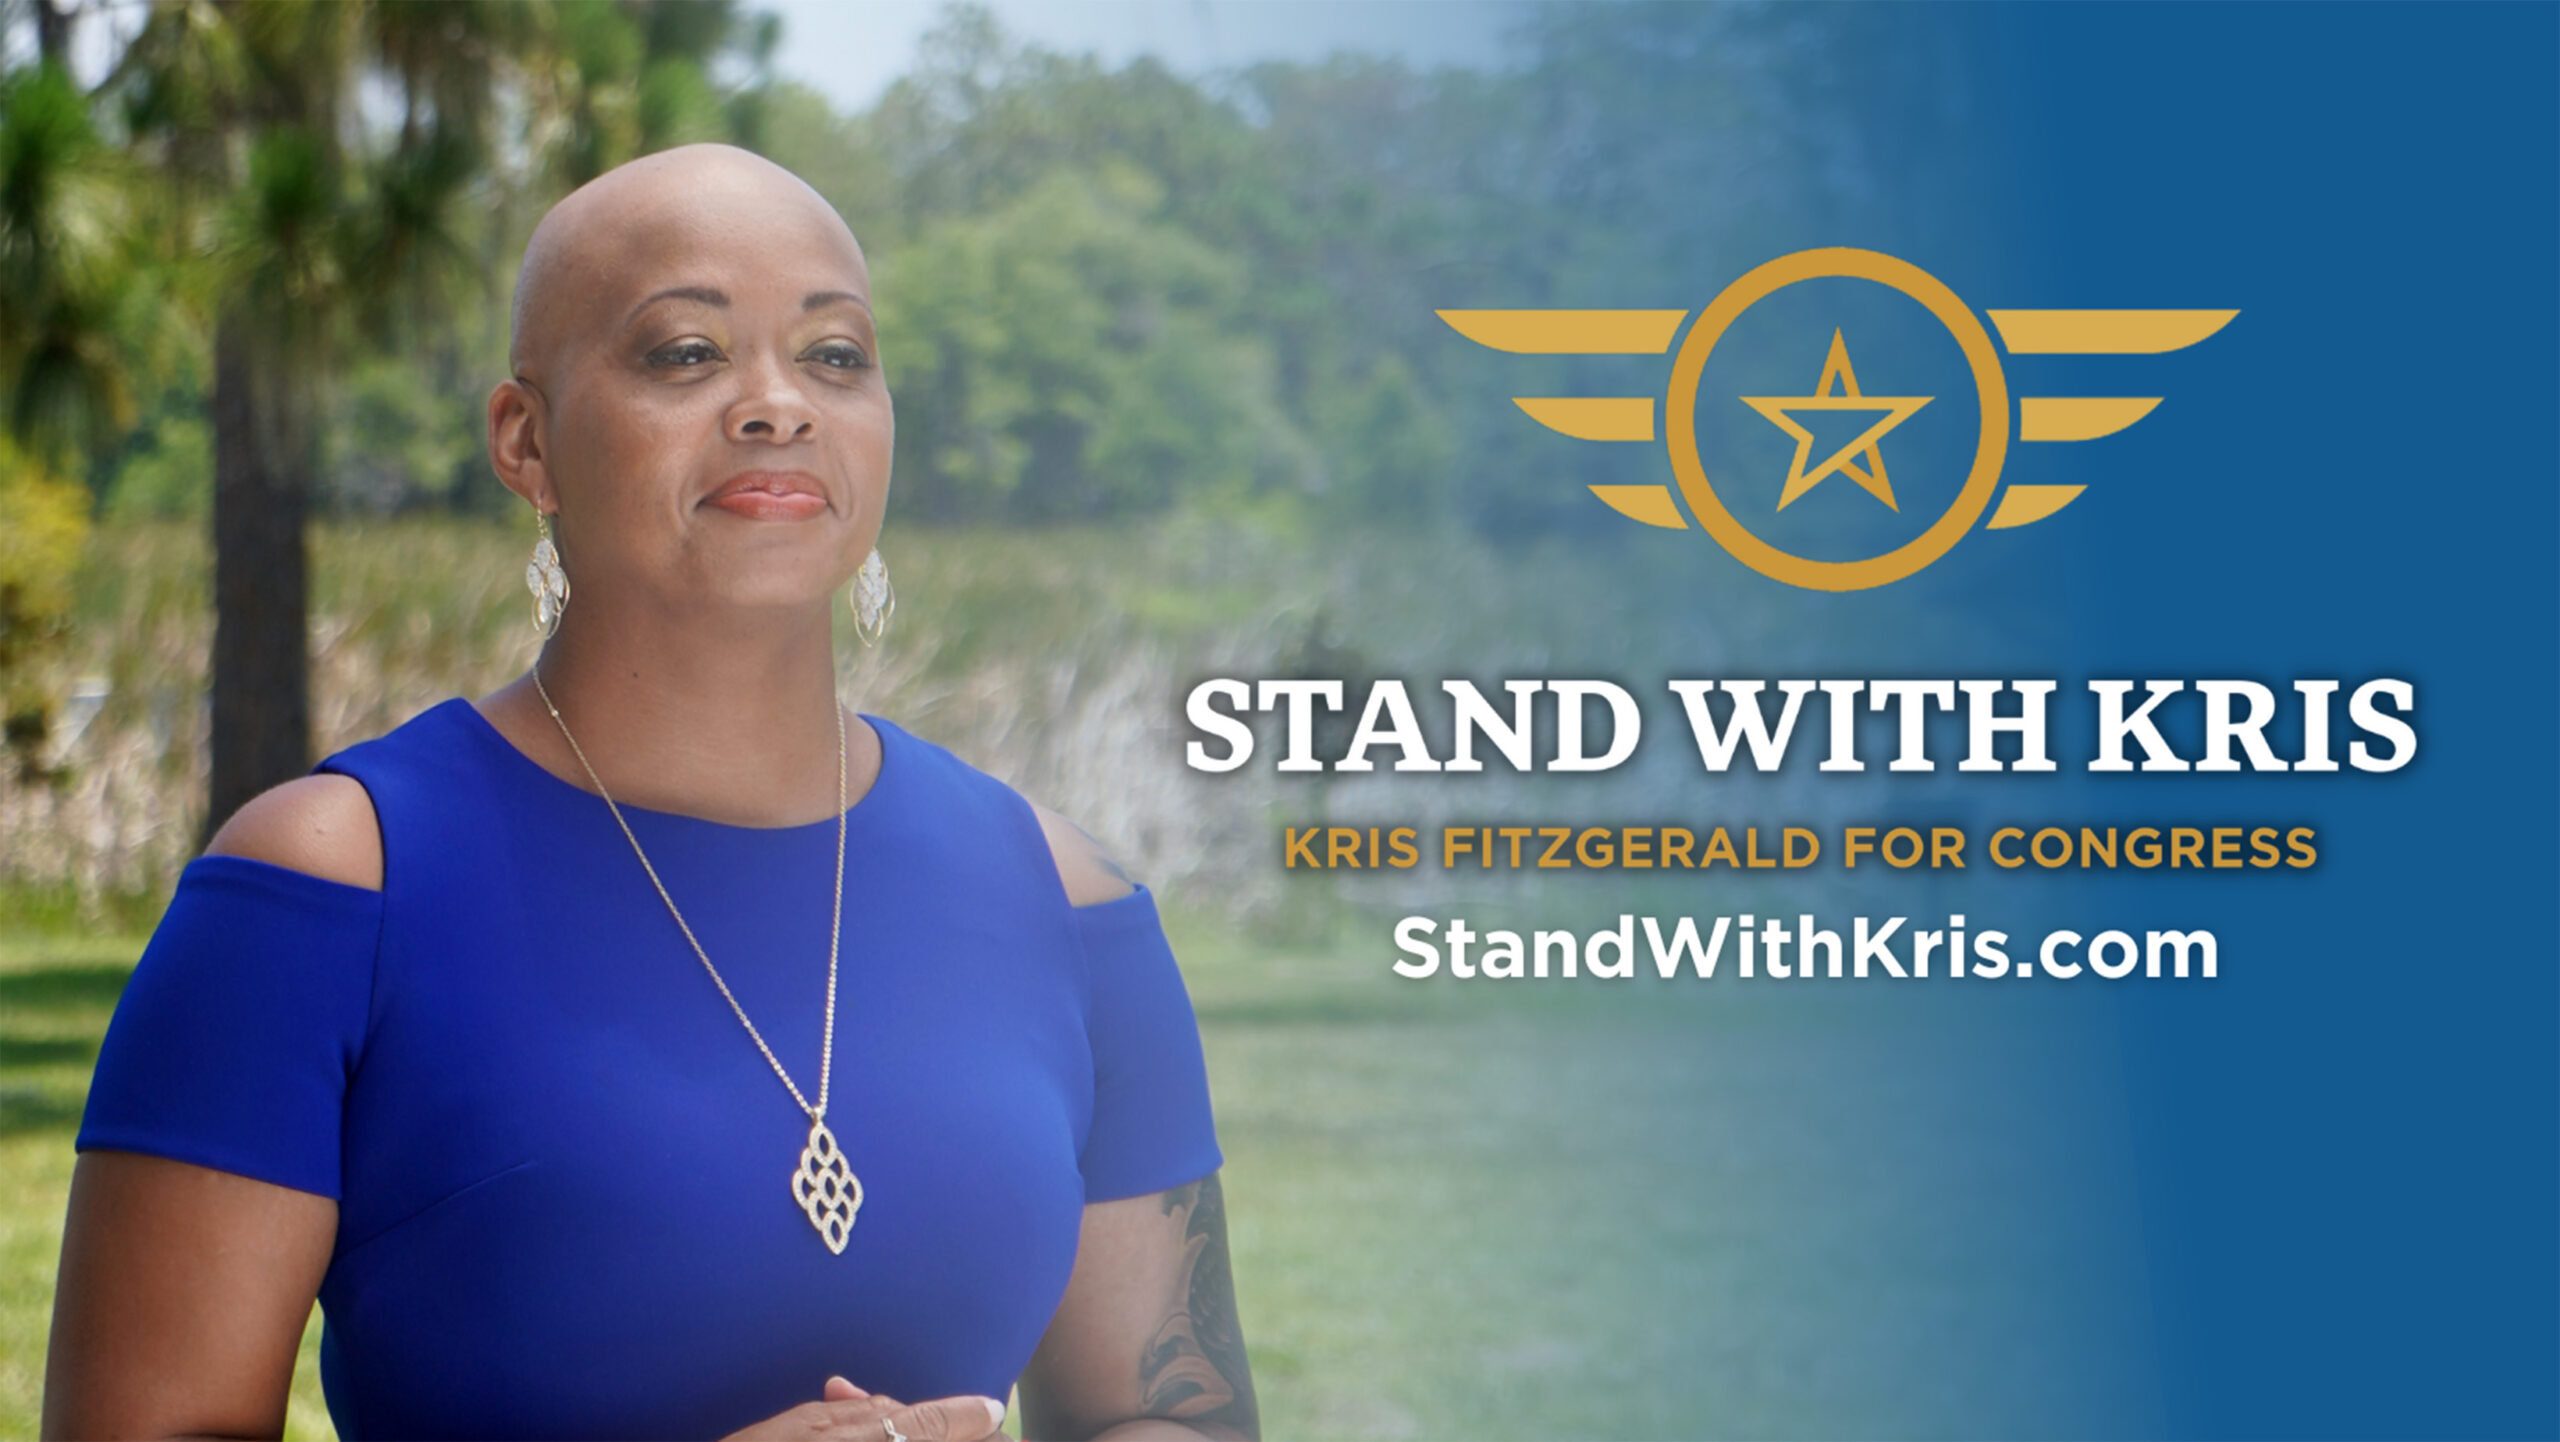 Stand with Kris - Kris Fitzgerald for Congress